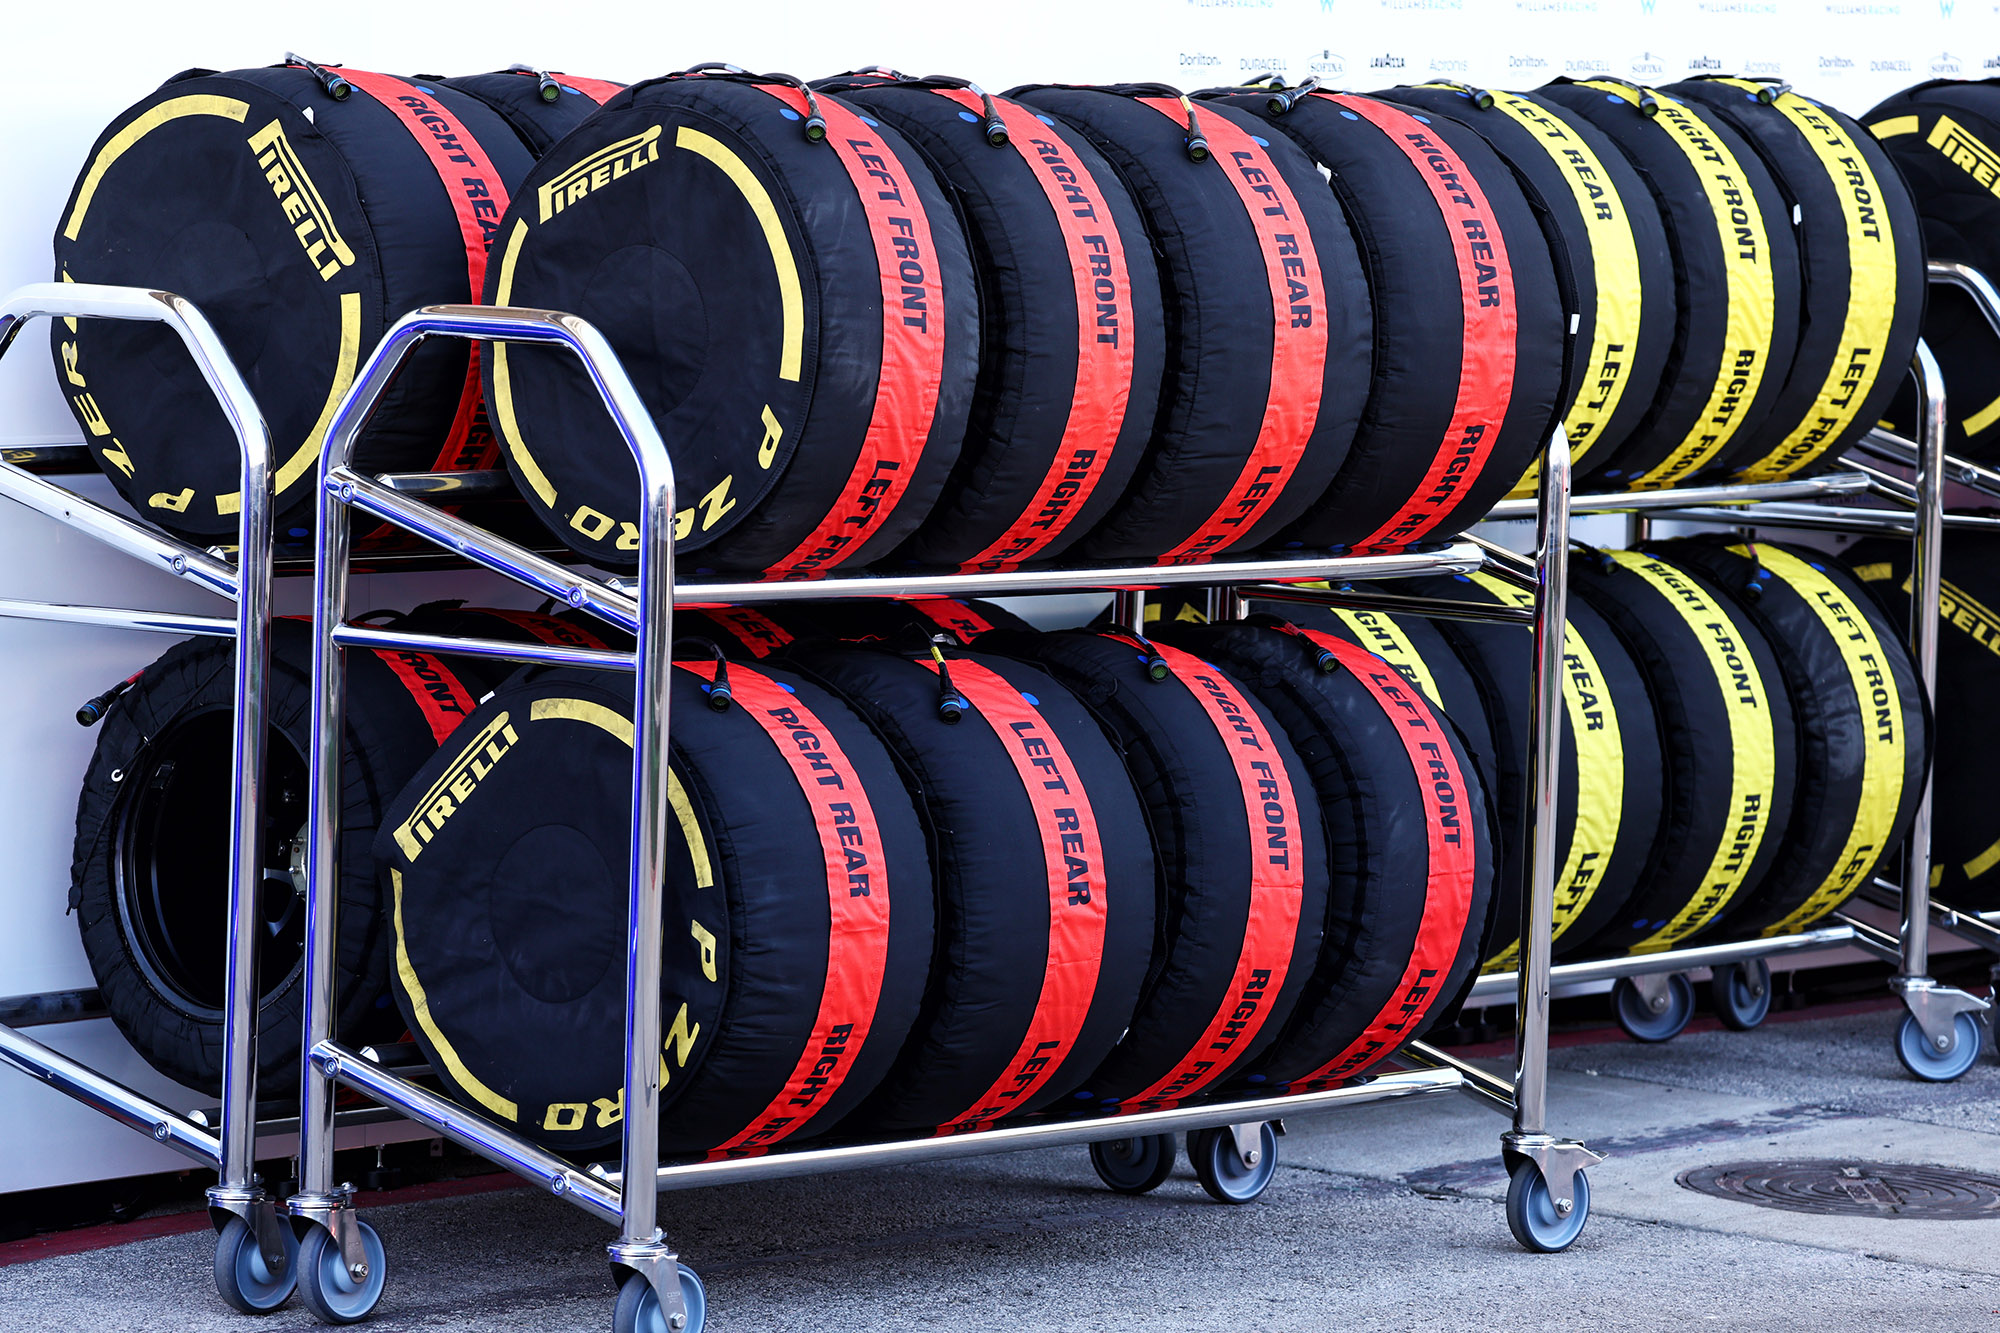 f1 tyre blanket ban loses 2024 vote, now earmarked for 2025